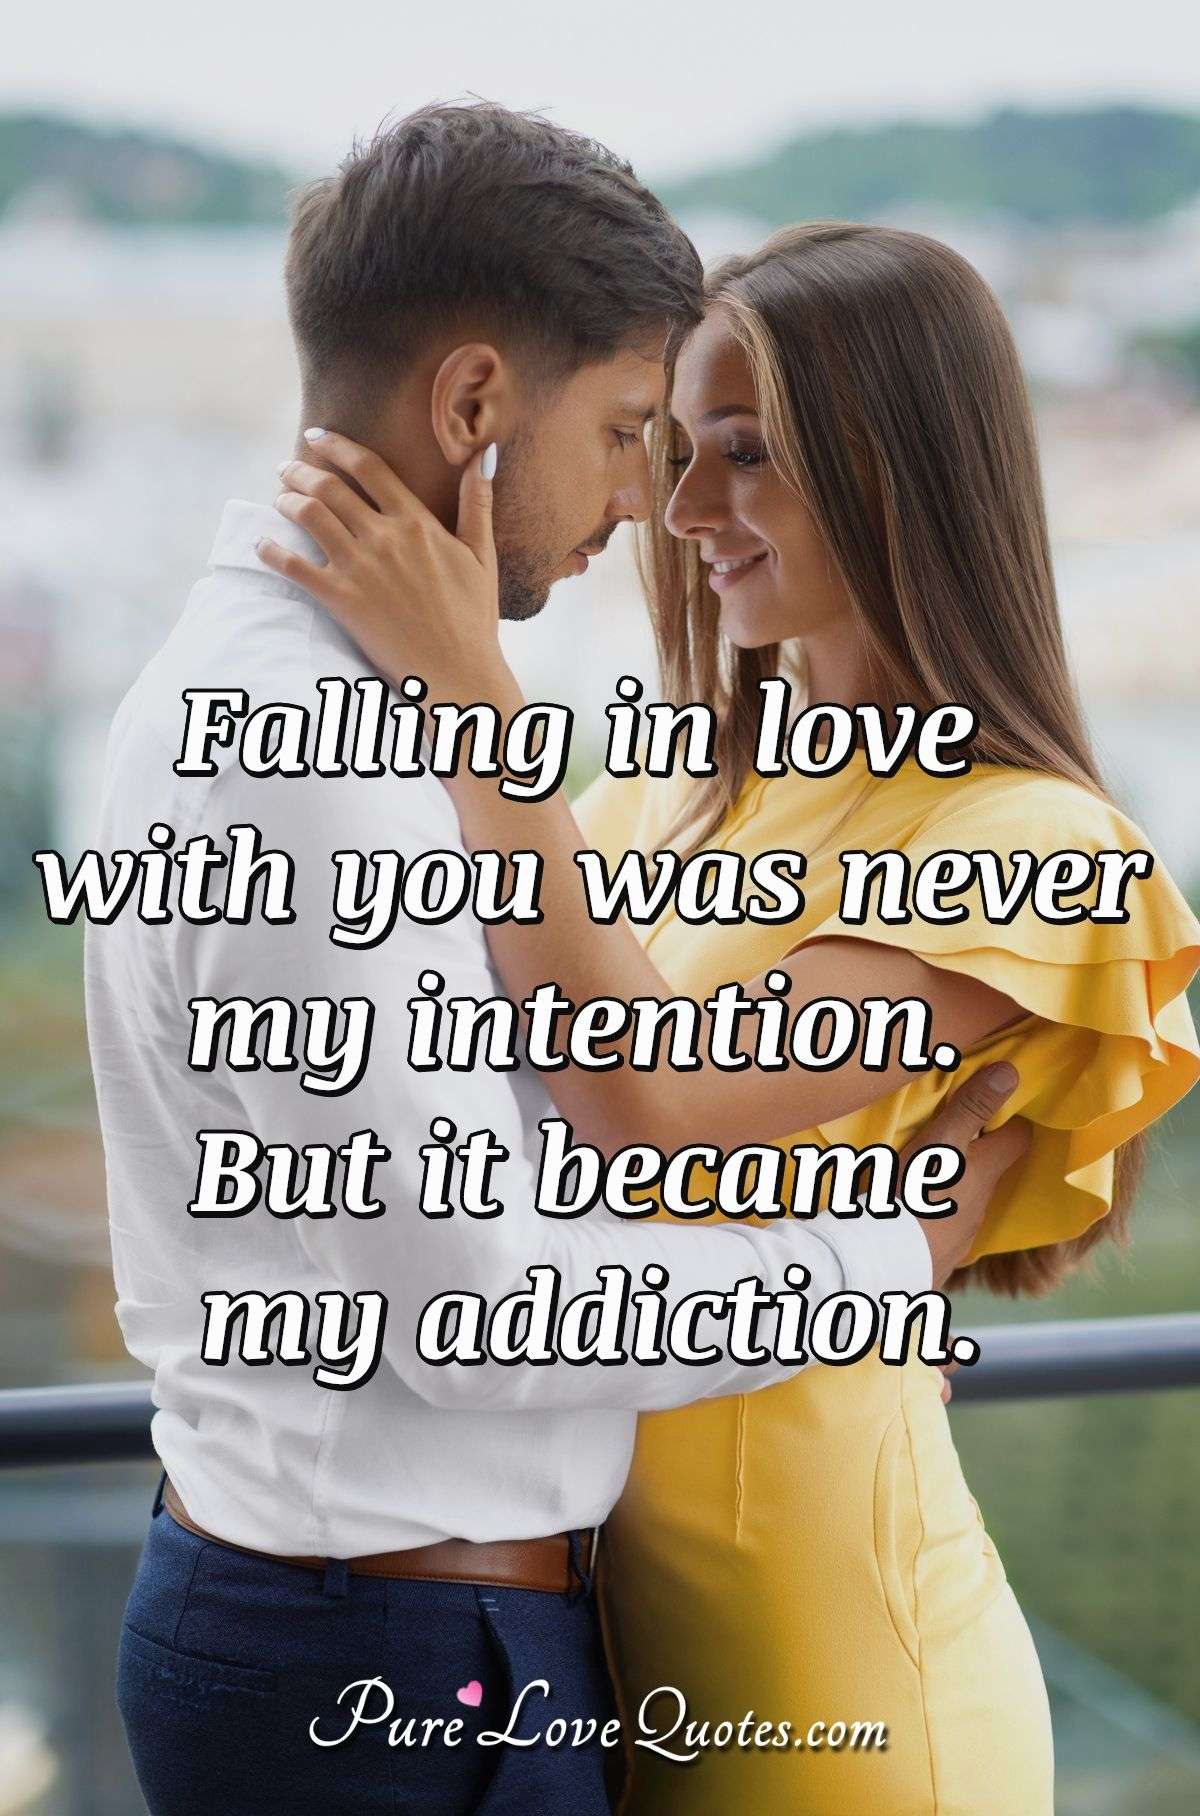 Falling in love with you was never my intention. But it became my